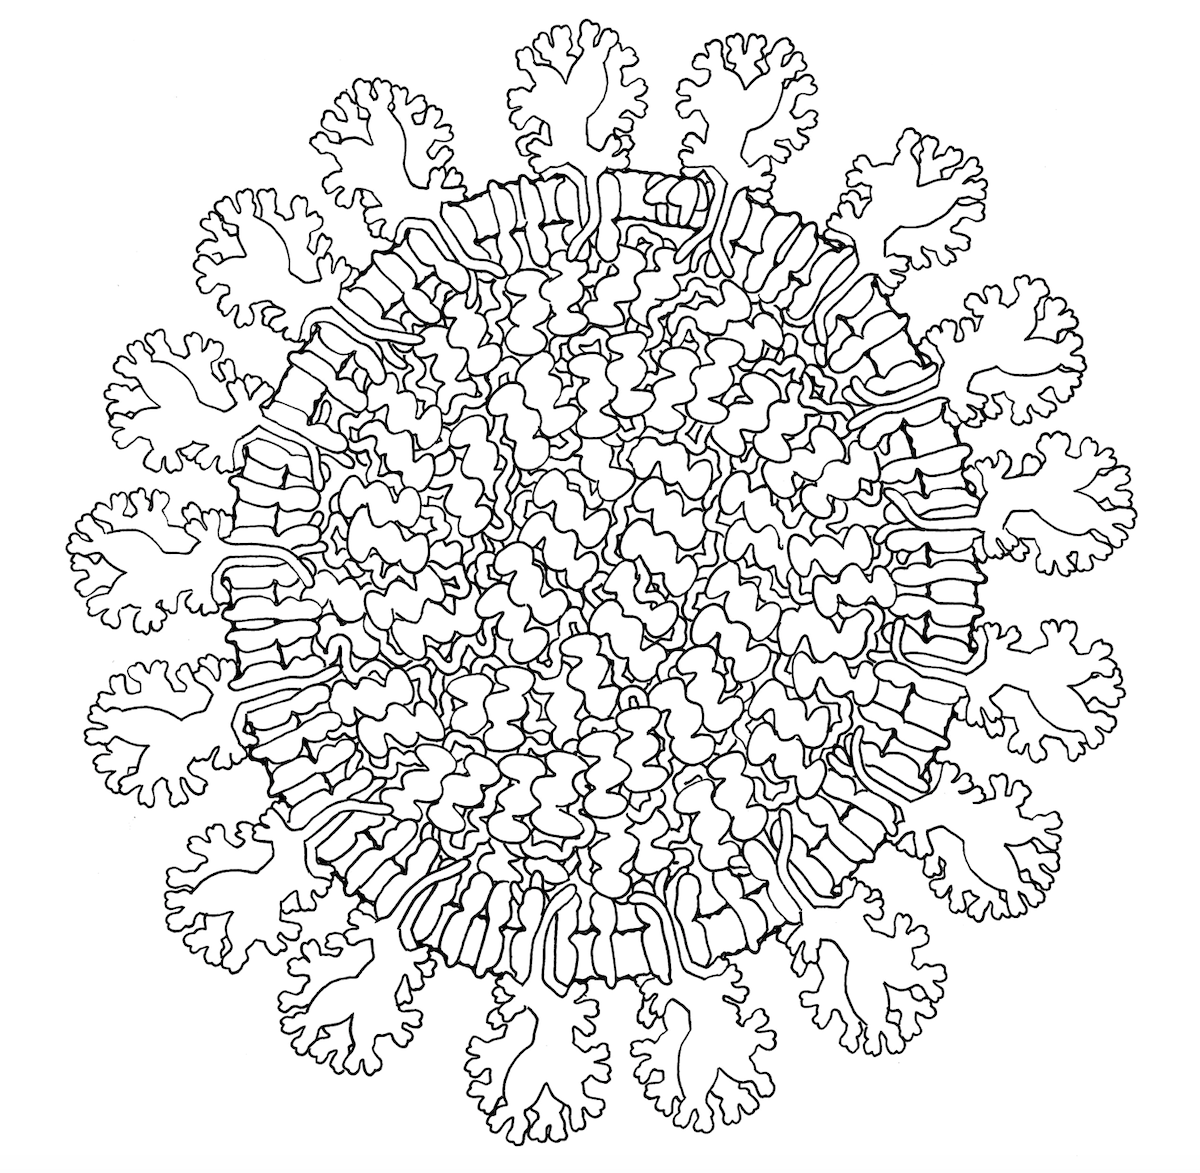 Color an image (<a href="https://pdb101.rcsb.org/learn/coloring-books/coloring-coronavirus">PDF</a>) of coronavirus based on a painting by David S. Goodsell.